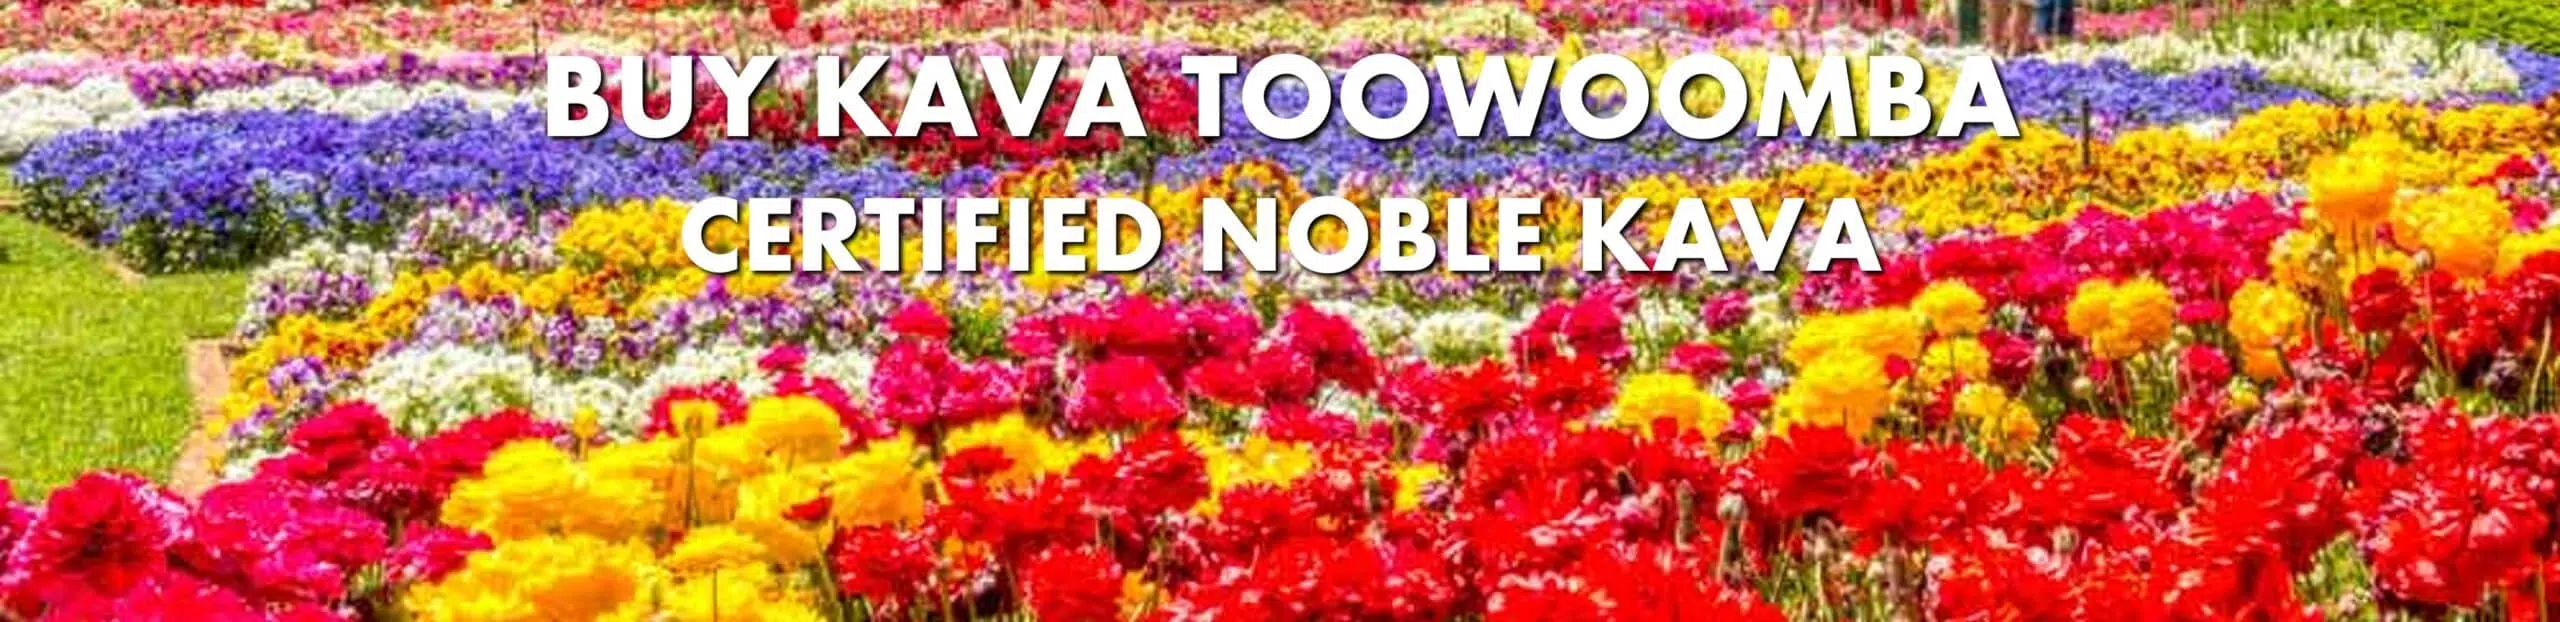 Flower display in Toowoomba Queensland with caption Buy Kava Toowoomba Certified Noble Kava